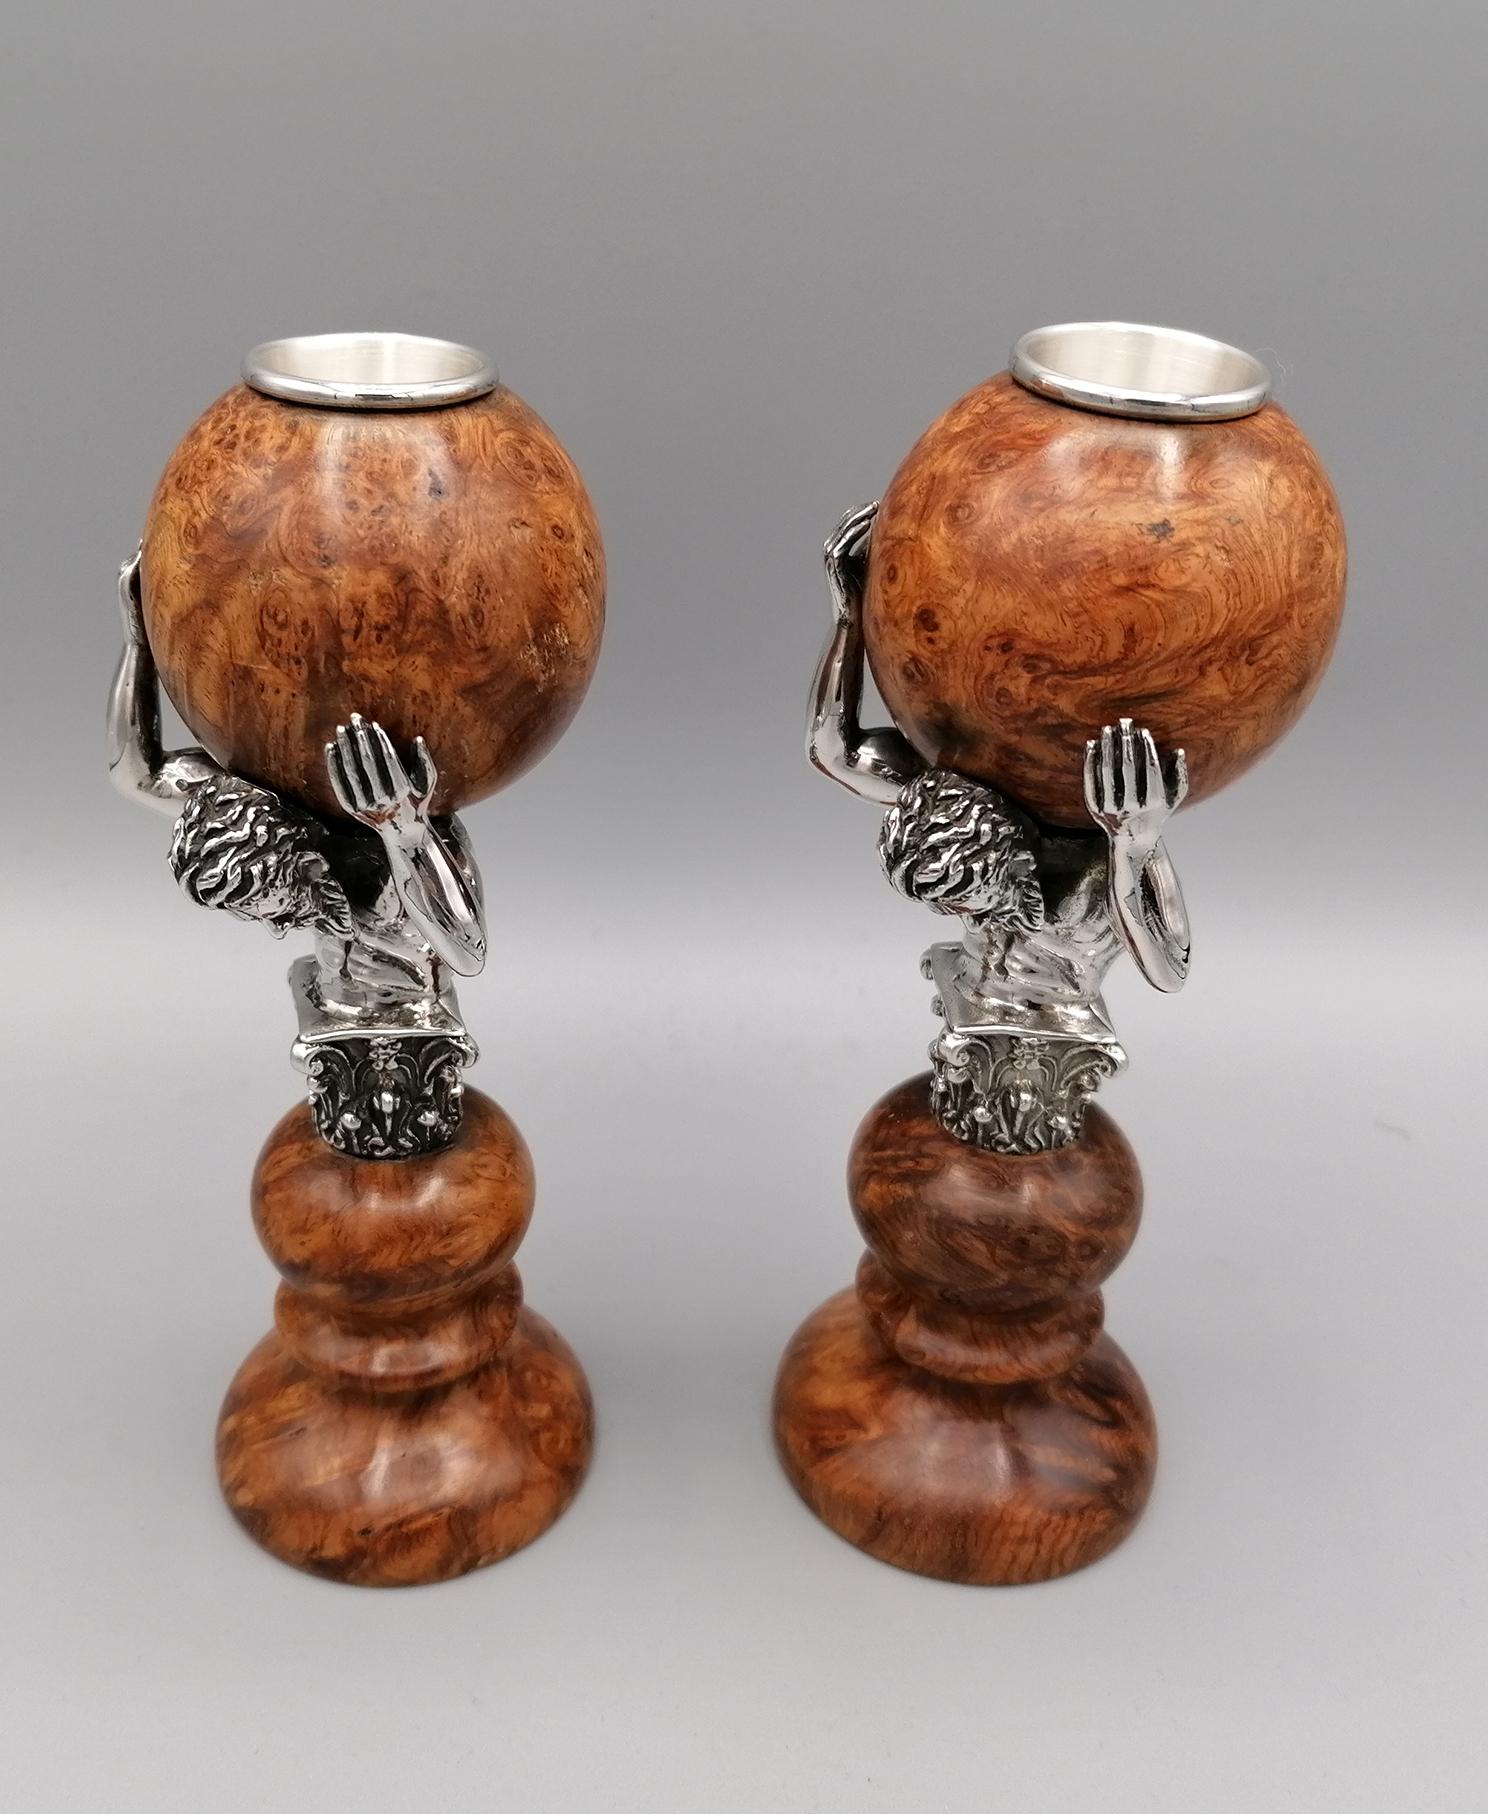 Pair of sterling silver candlesticks, depicting Hercules holding the world.
The figure of Hercules and the candle holder are in 925 silver while the world and the base are in rutinia briar.

Italian silverware, already with a centuries-old